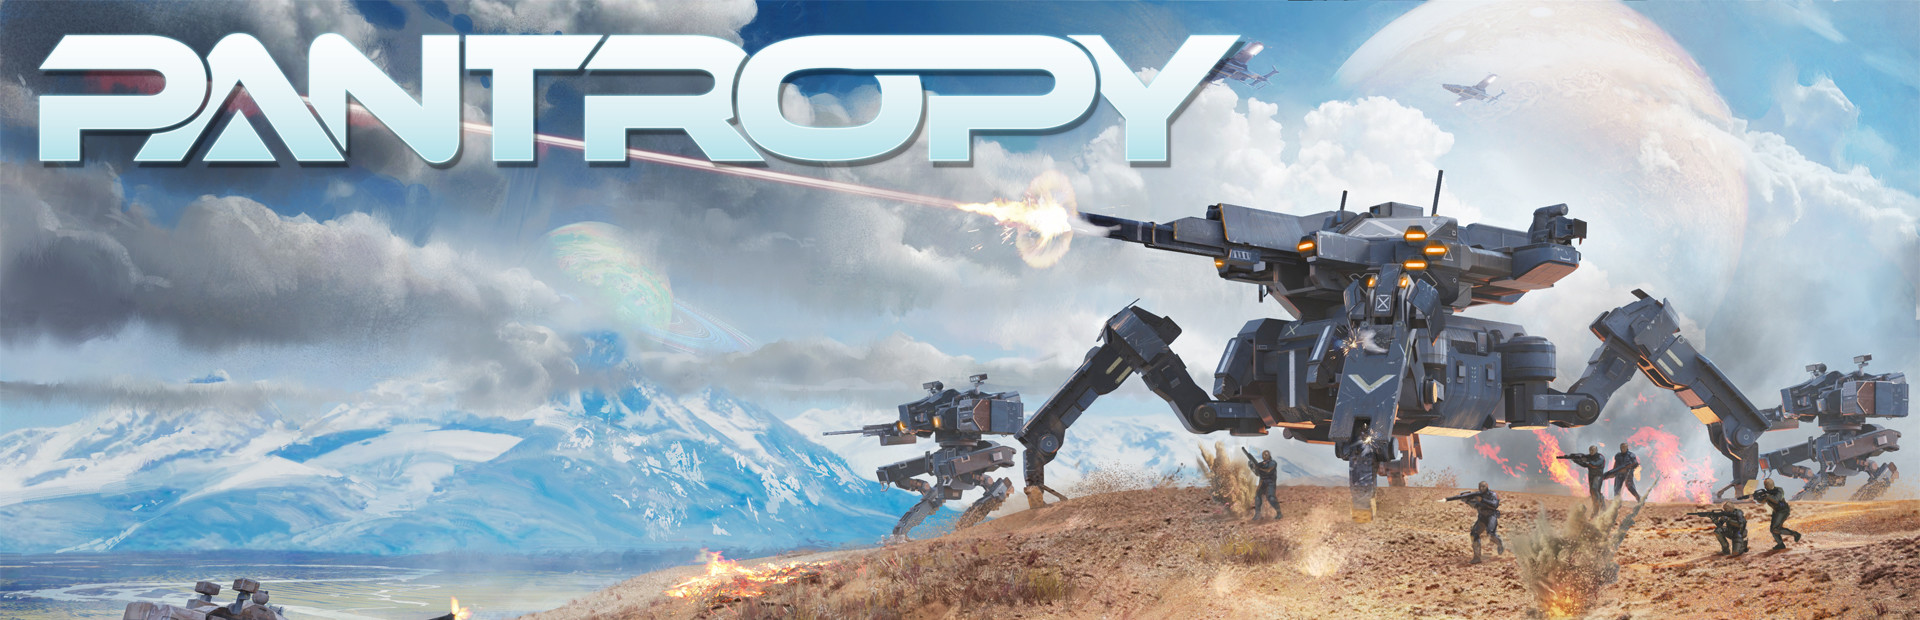 Pantropy cover image